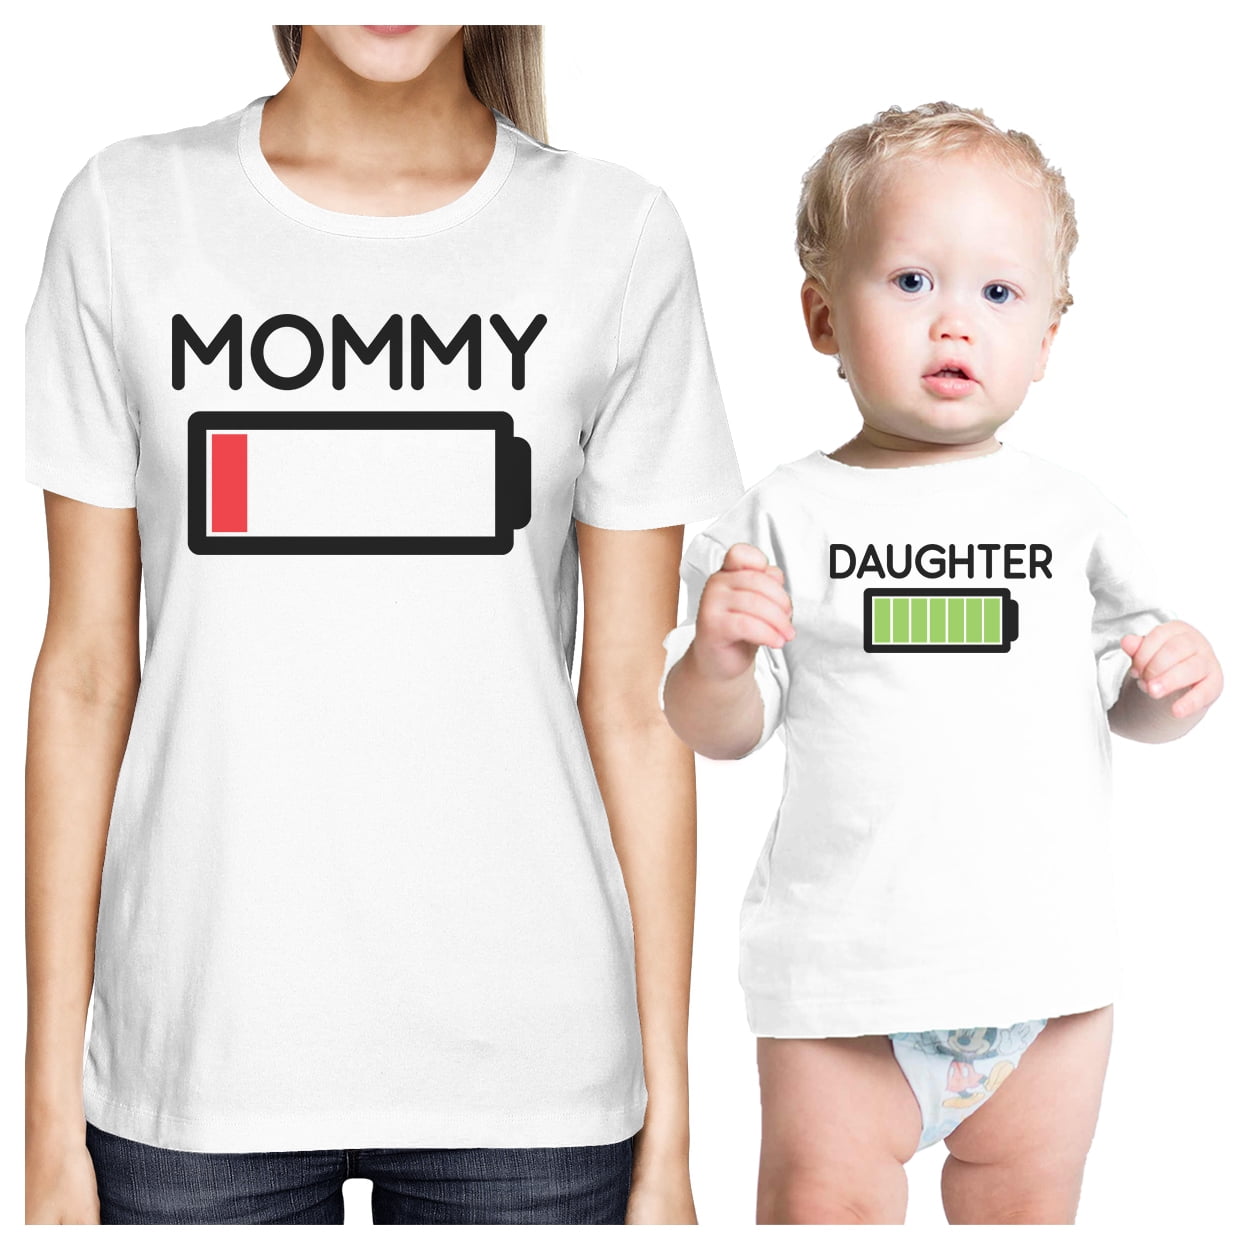 mother baby clothes matching